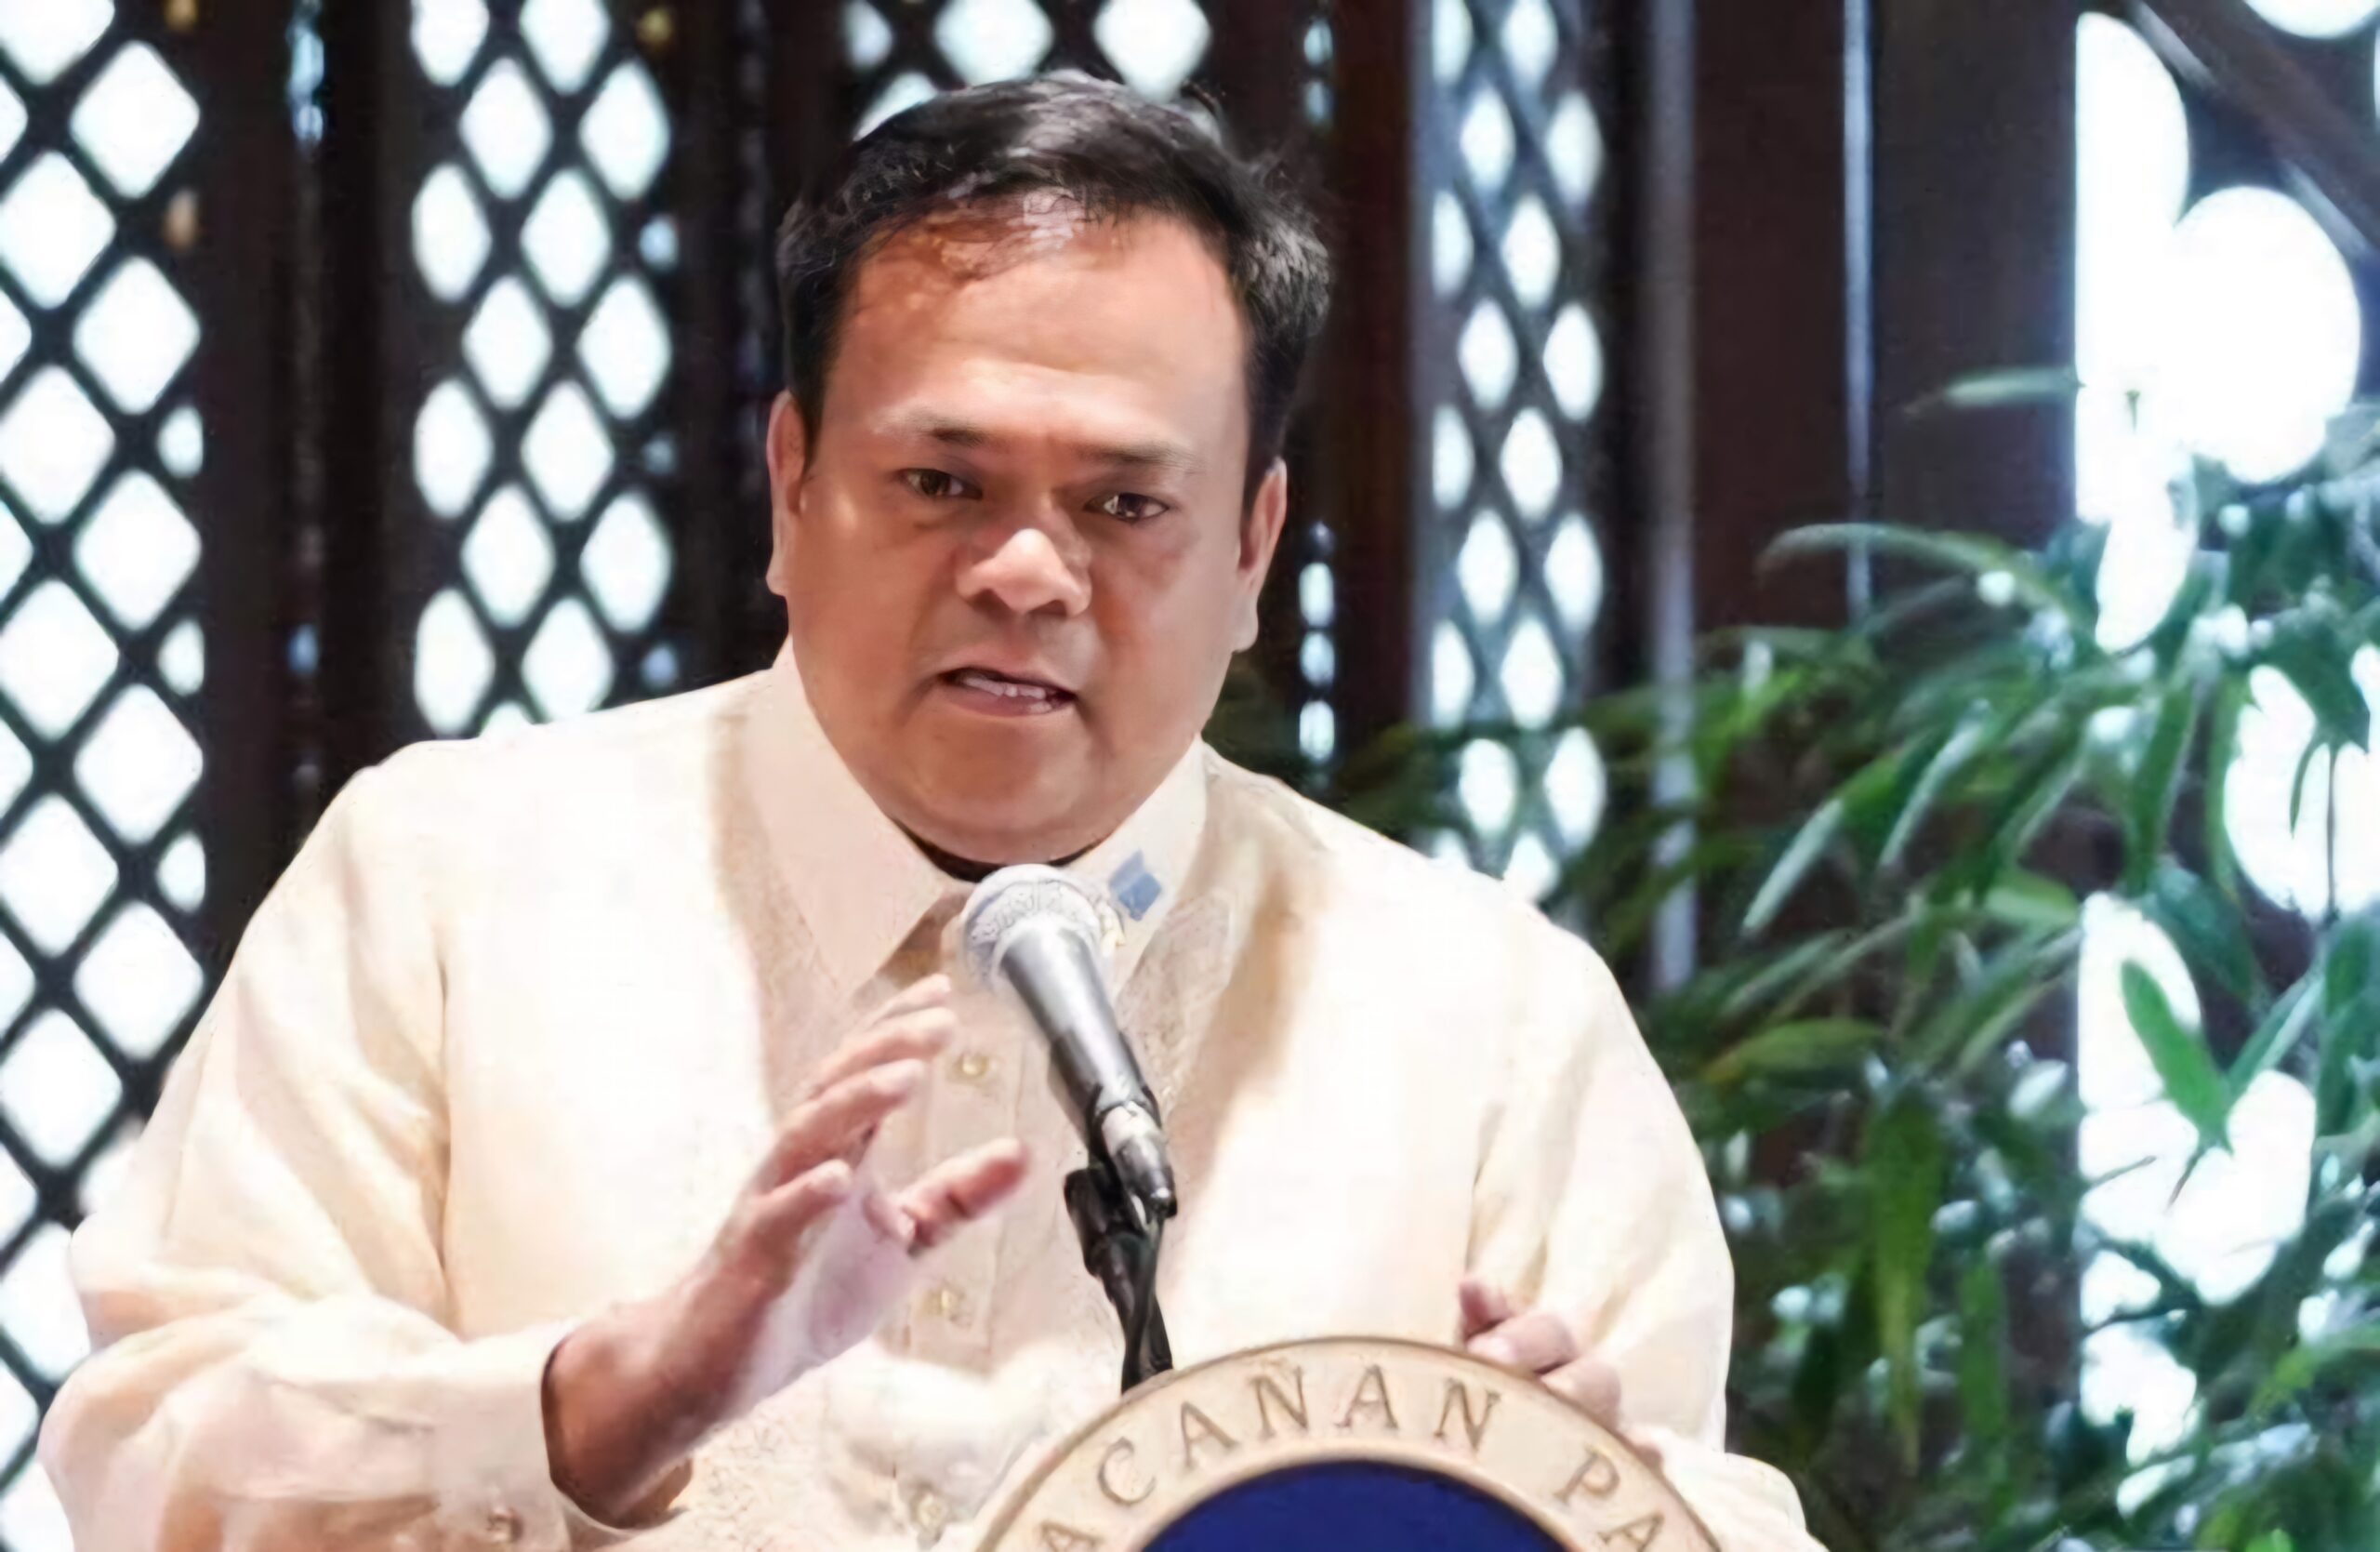 BARMM controversy brews over alleged Malacañang plan to replace Murad in 2025